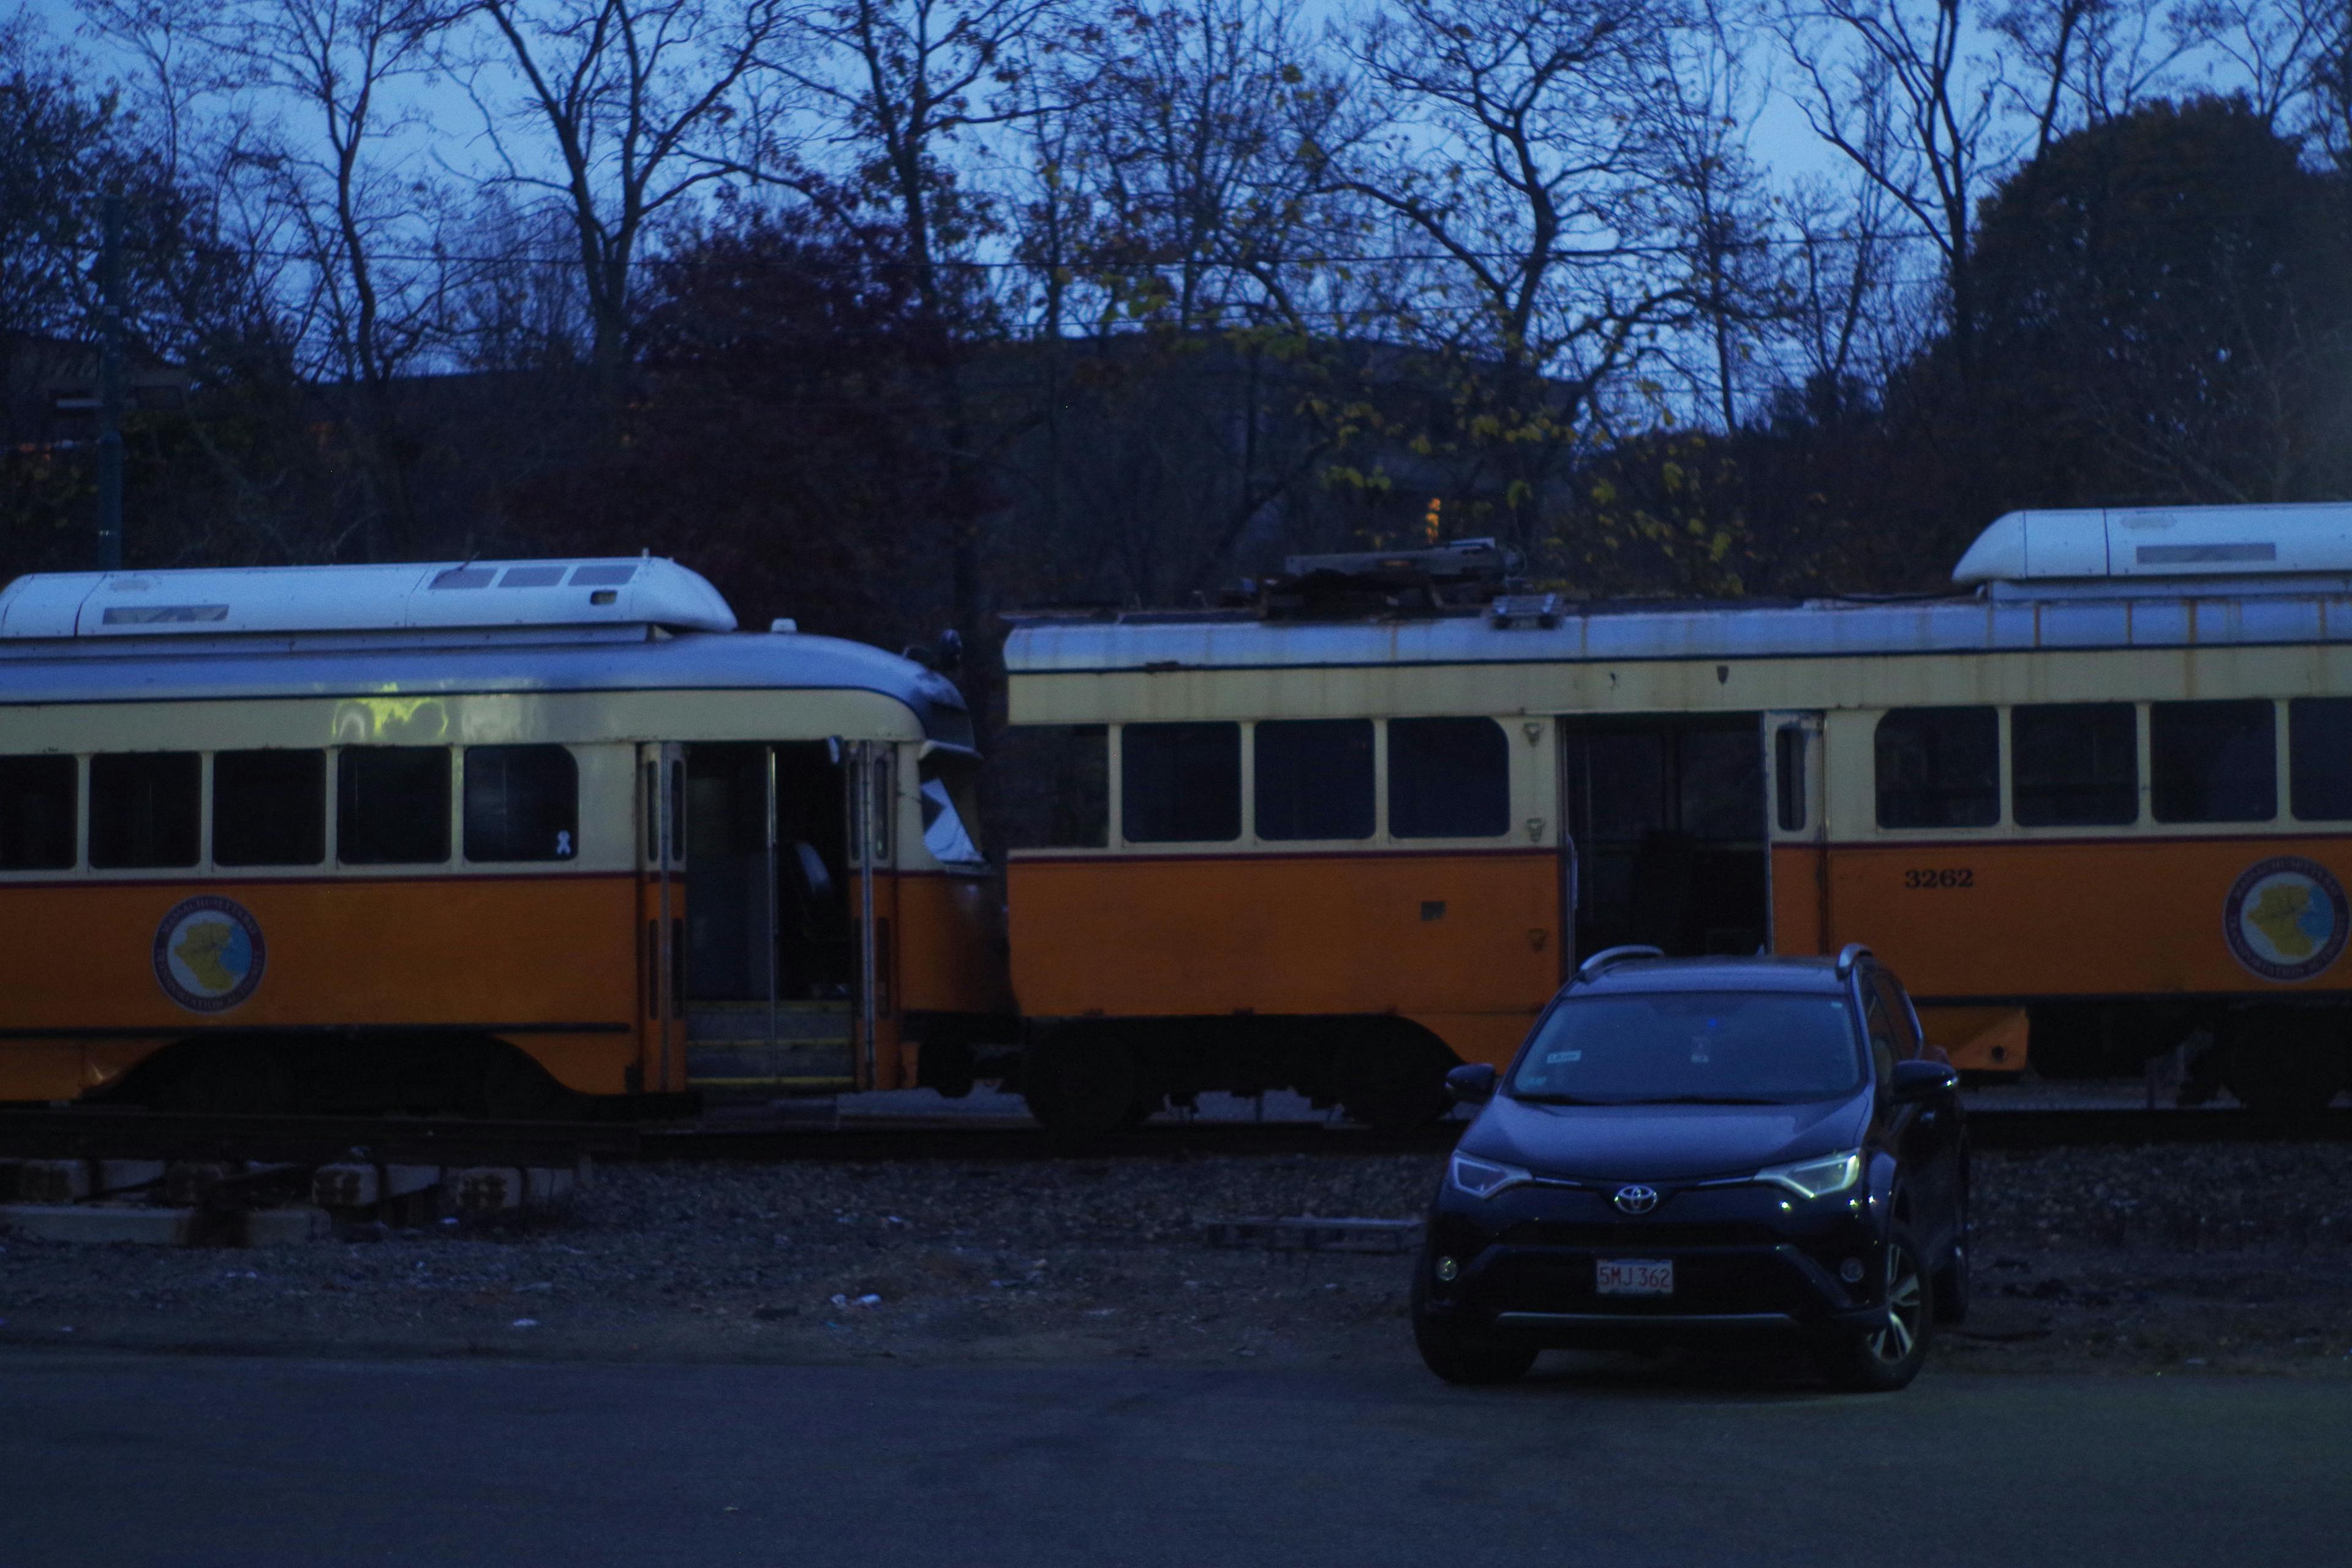 a picture of two streetcars in the train yard, one missing part of the car, with an SUV parked in front of them